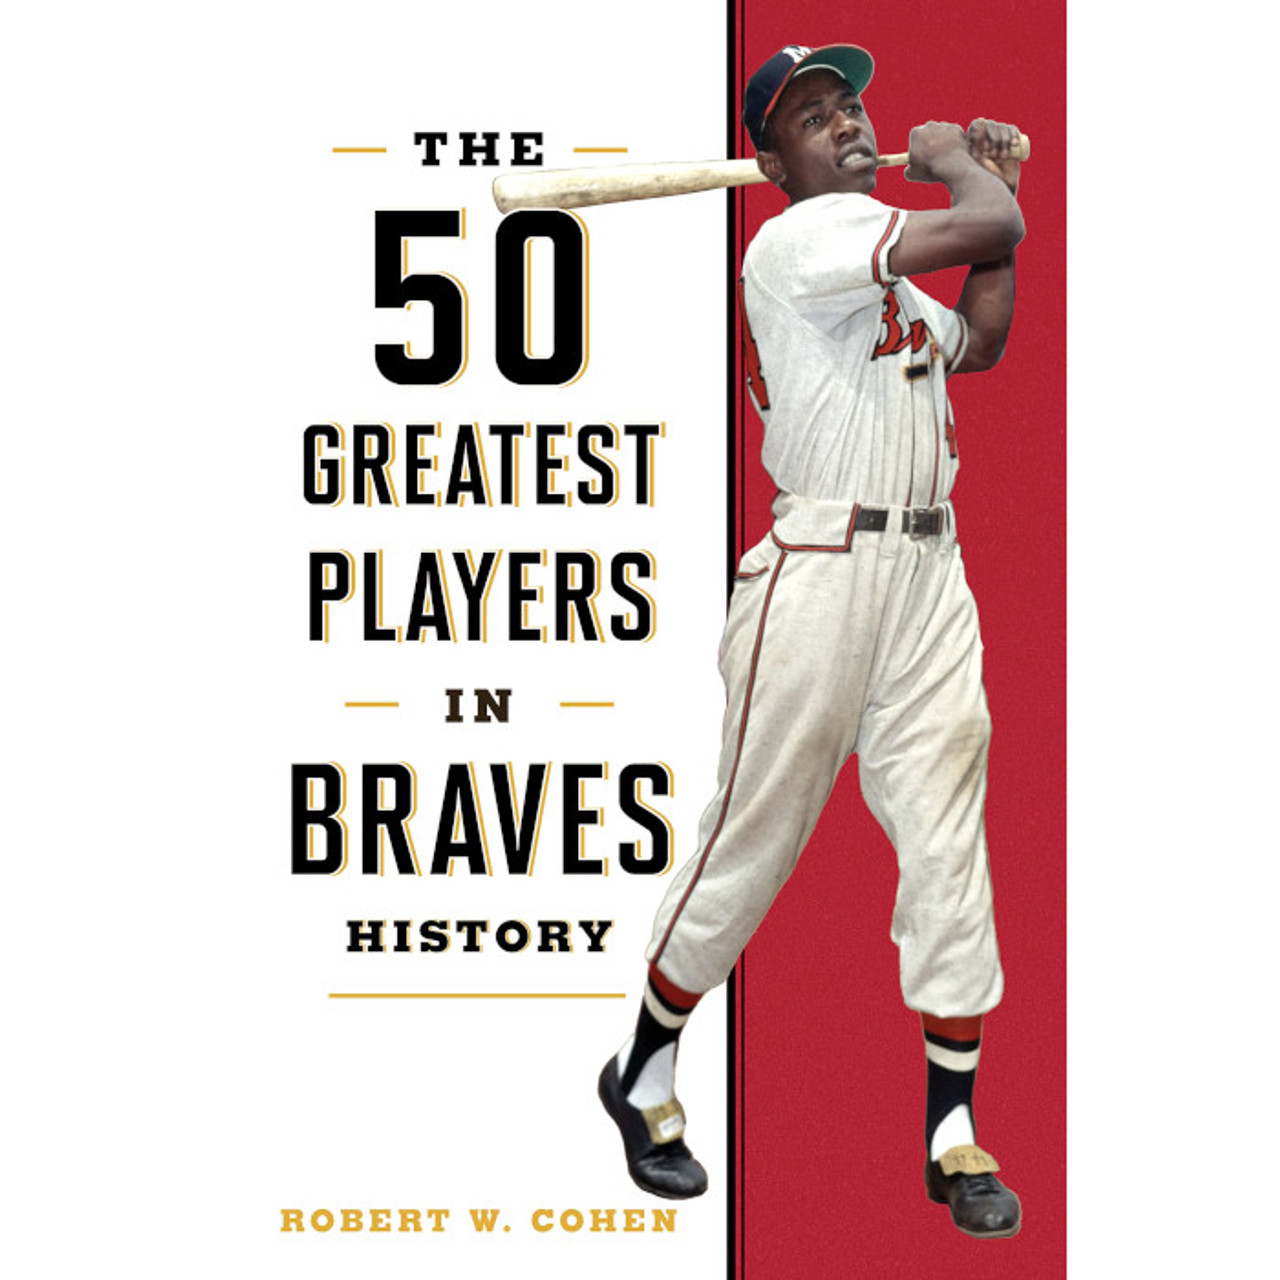 The 9 greatest players in Braves history